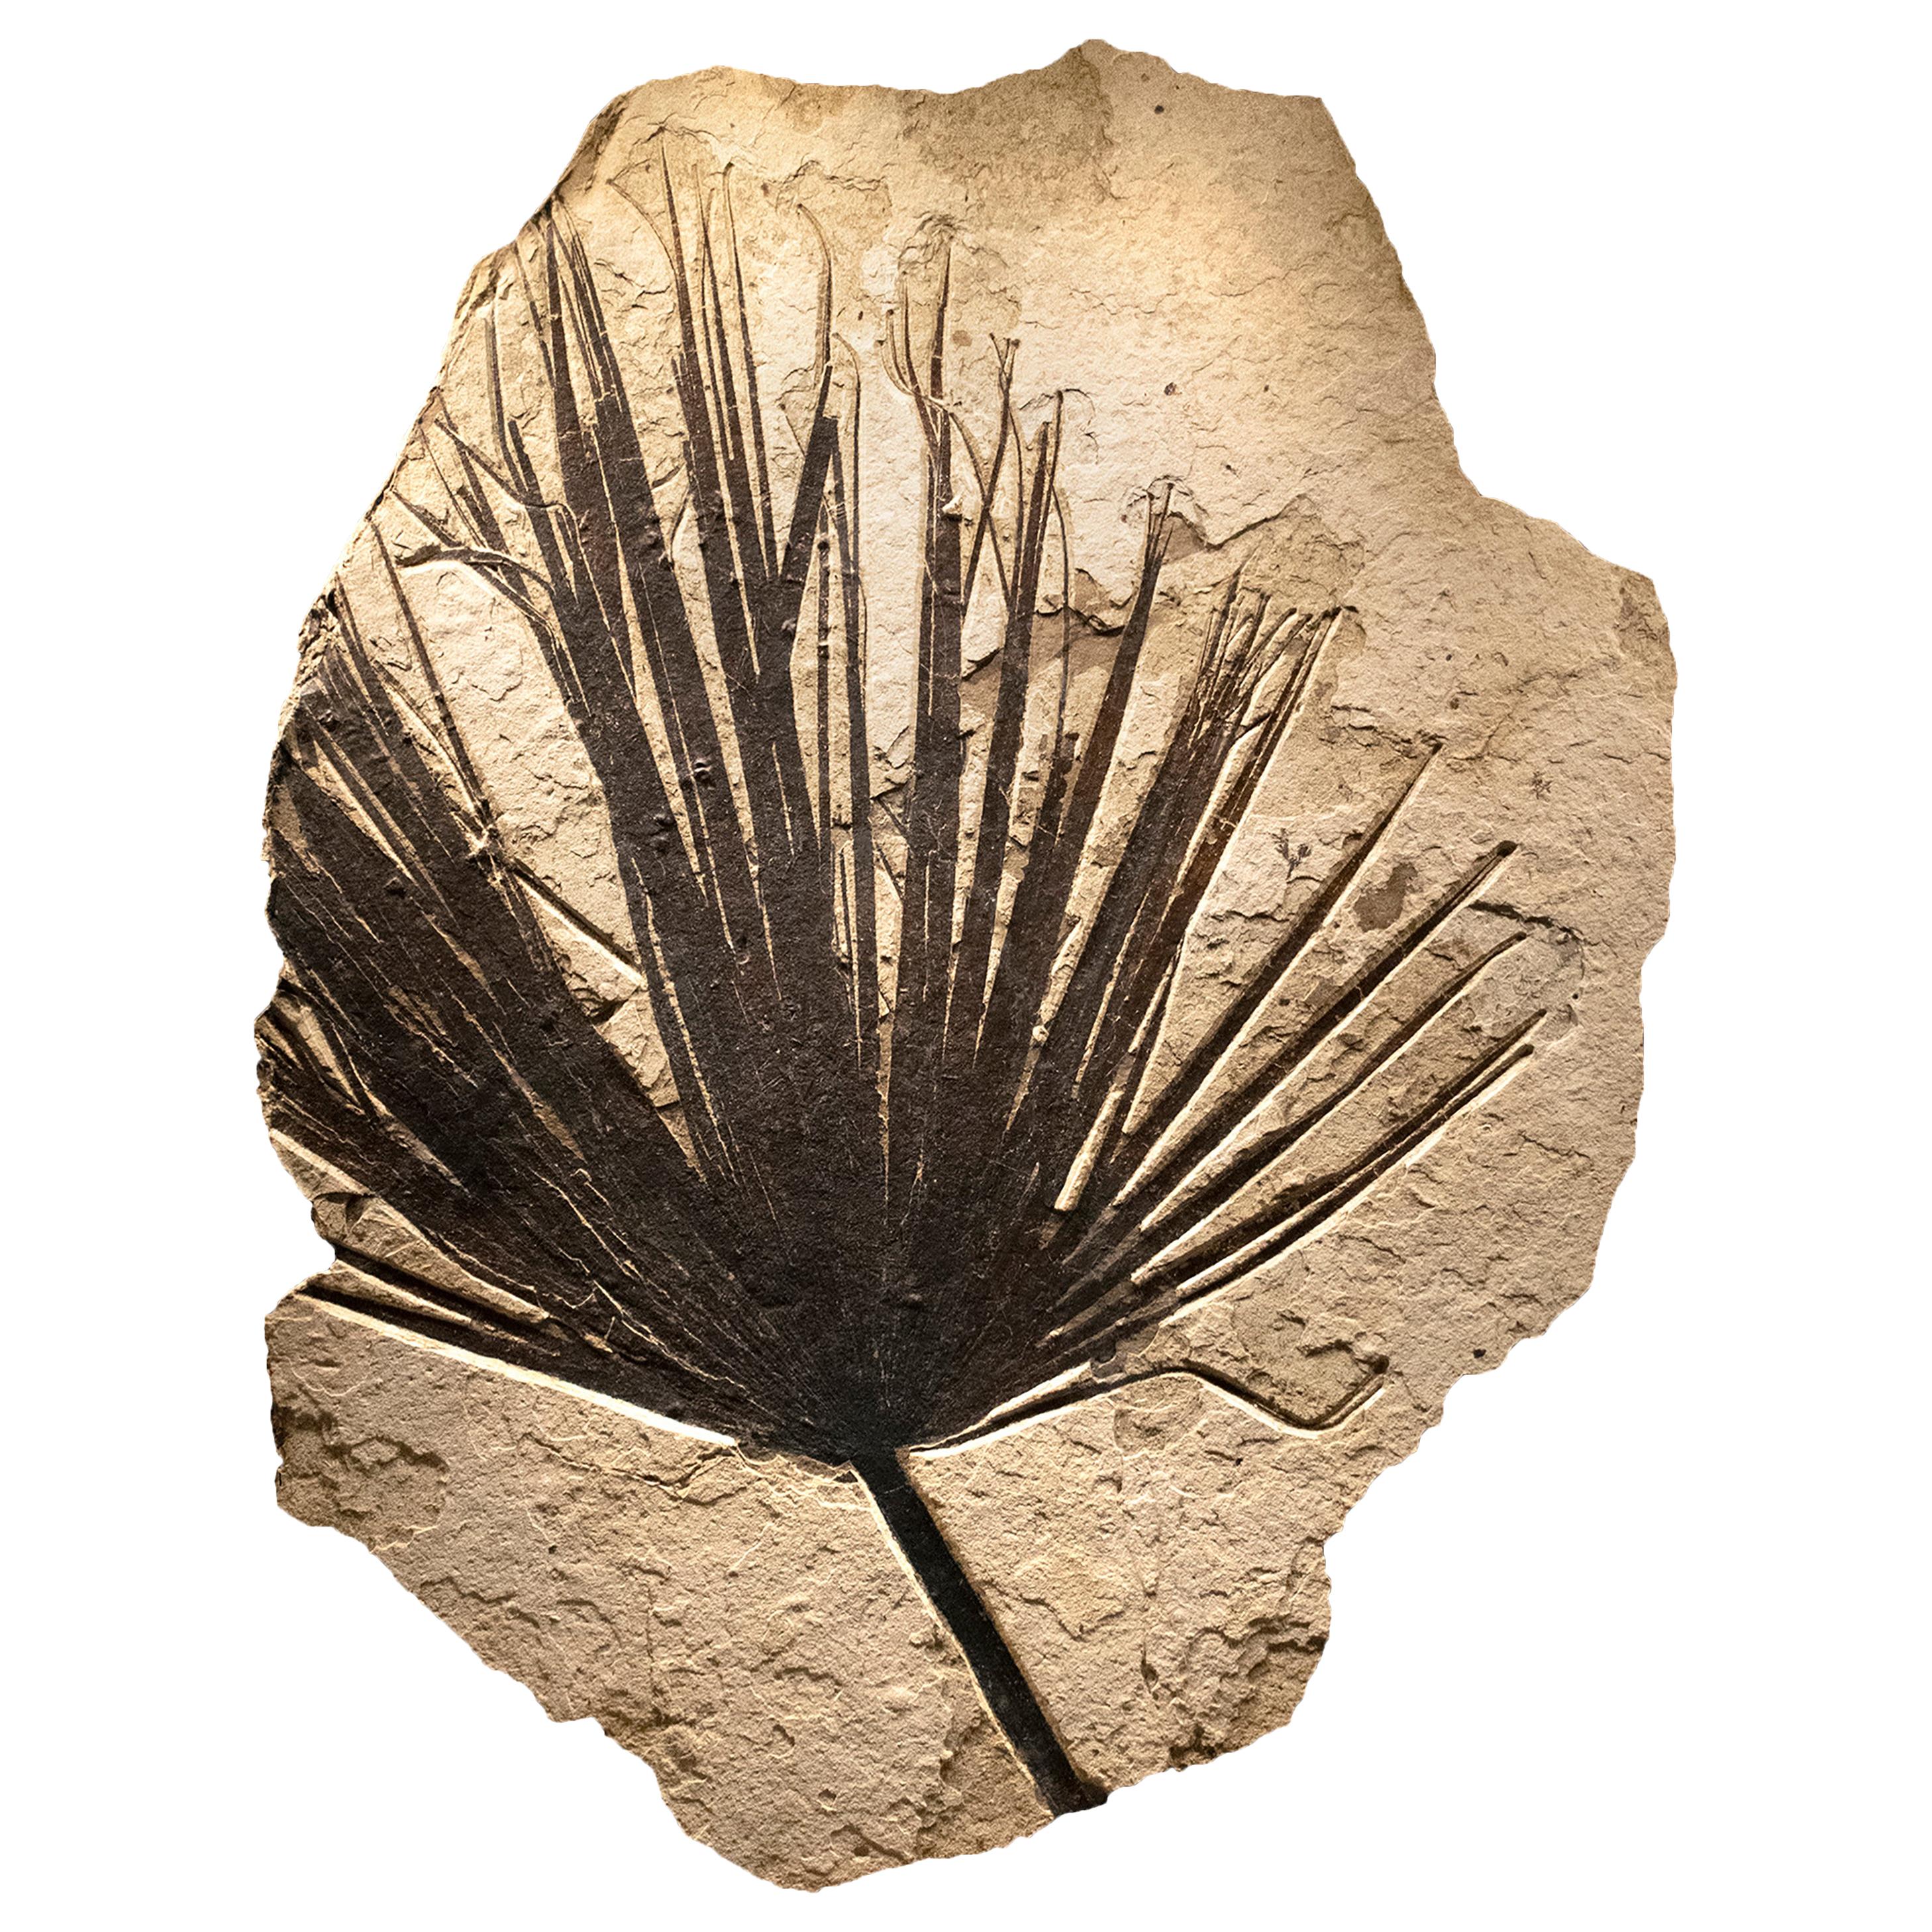 50 Million Year Old Eocene Era Fossil Palm Frond Mural in Stone, from Wyoming